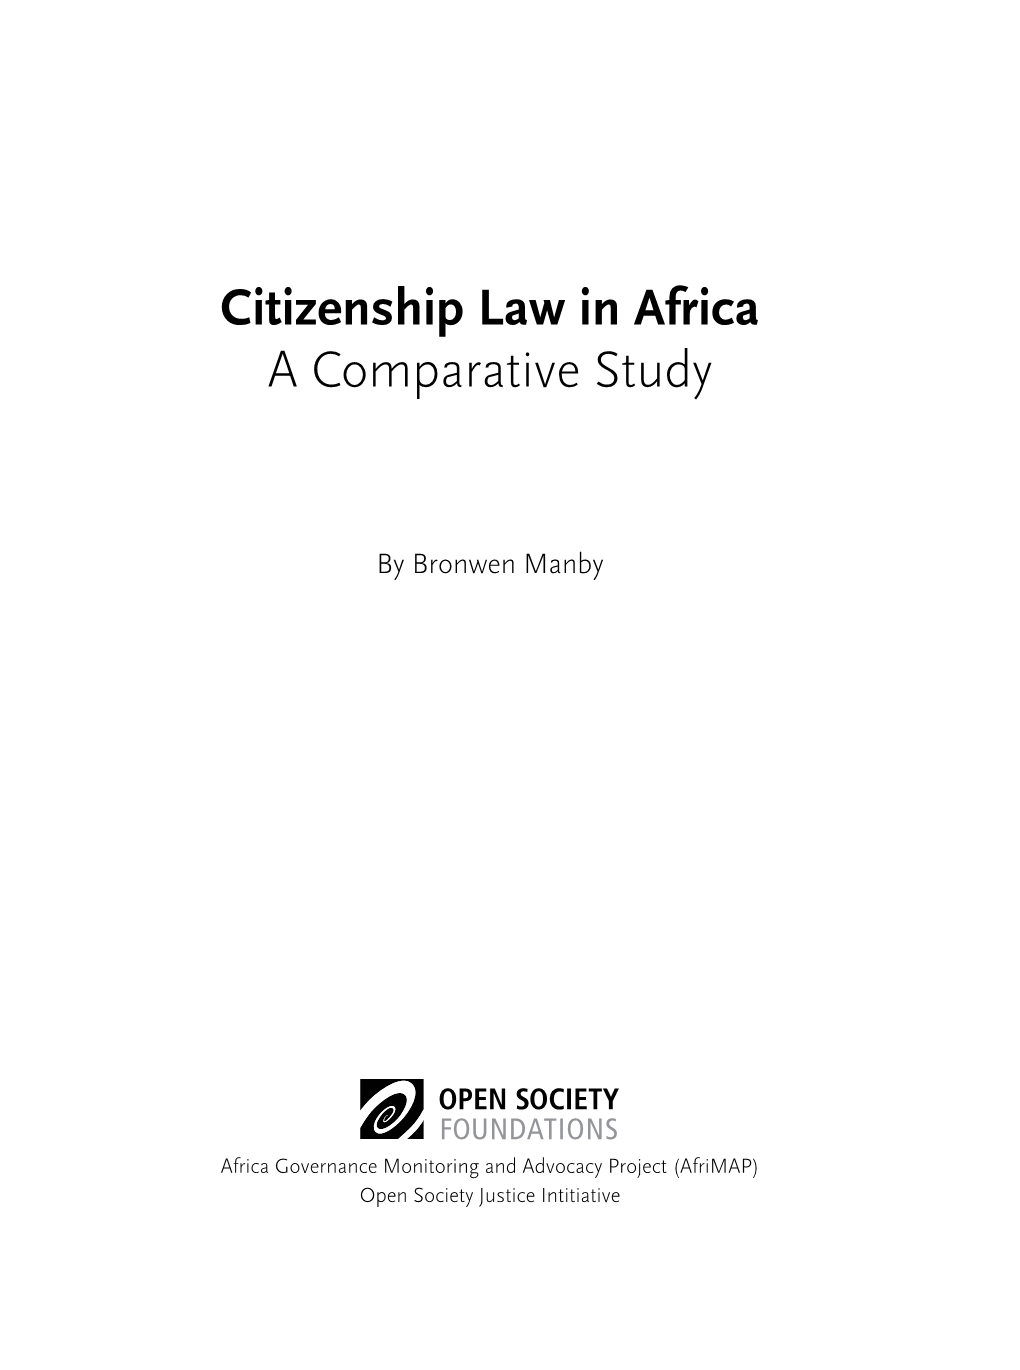 Citizenship Law in Africa a Comparative Study